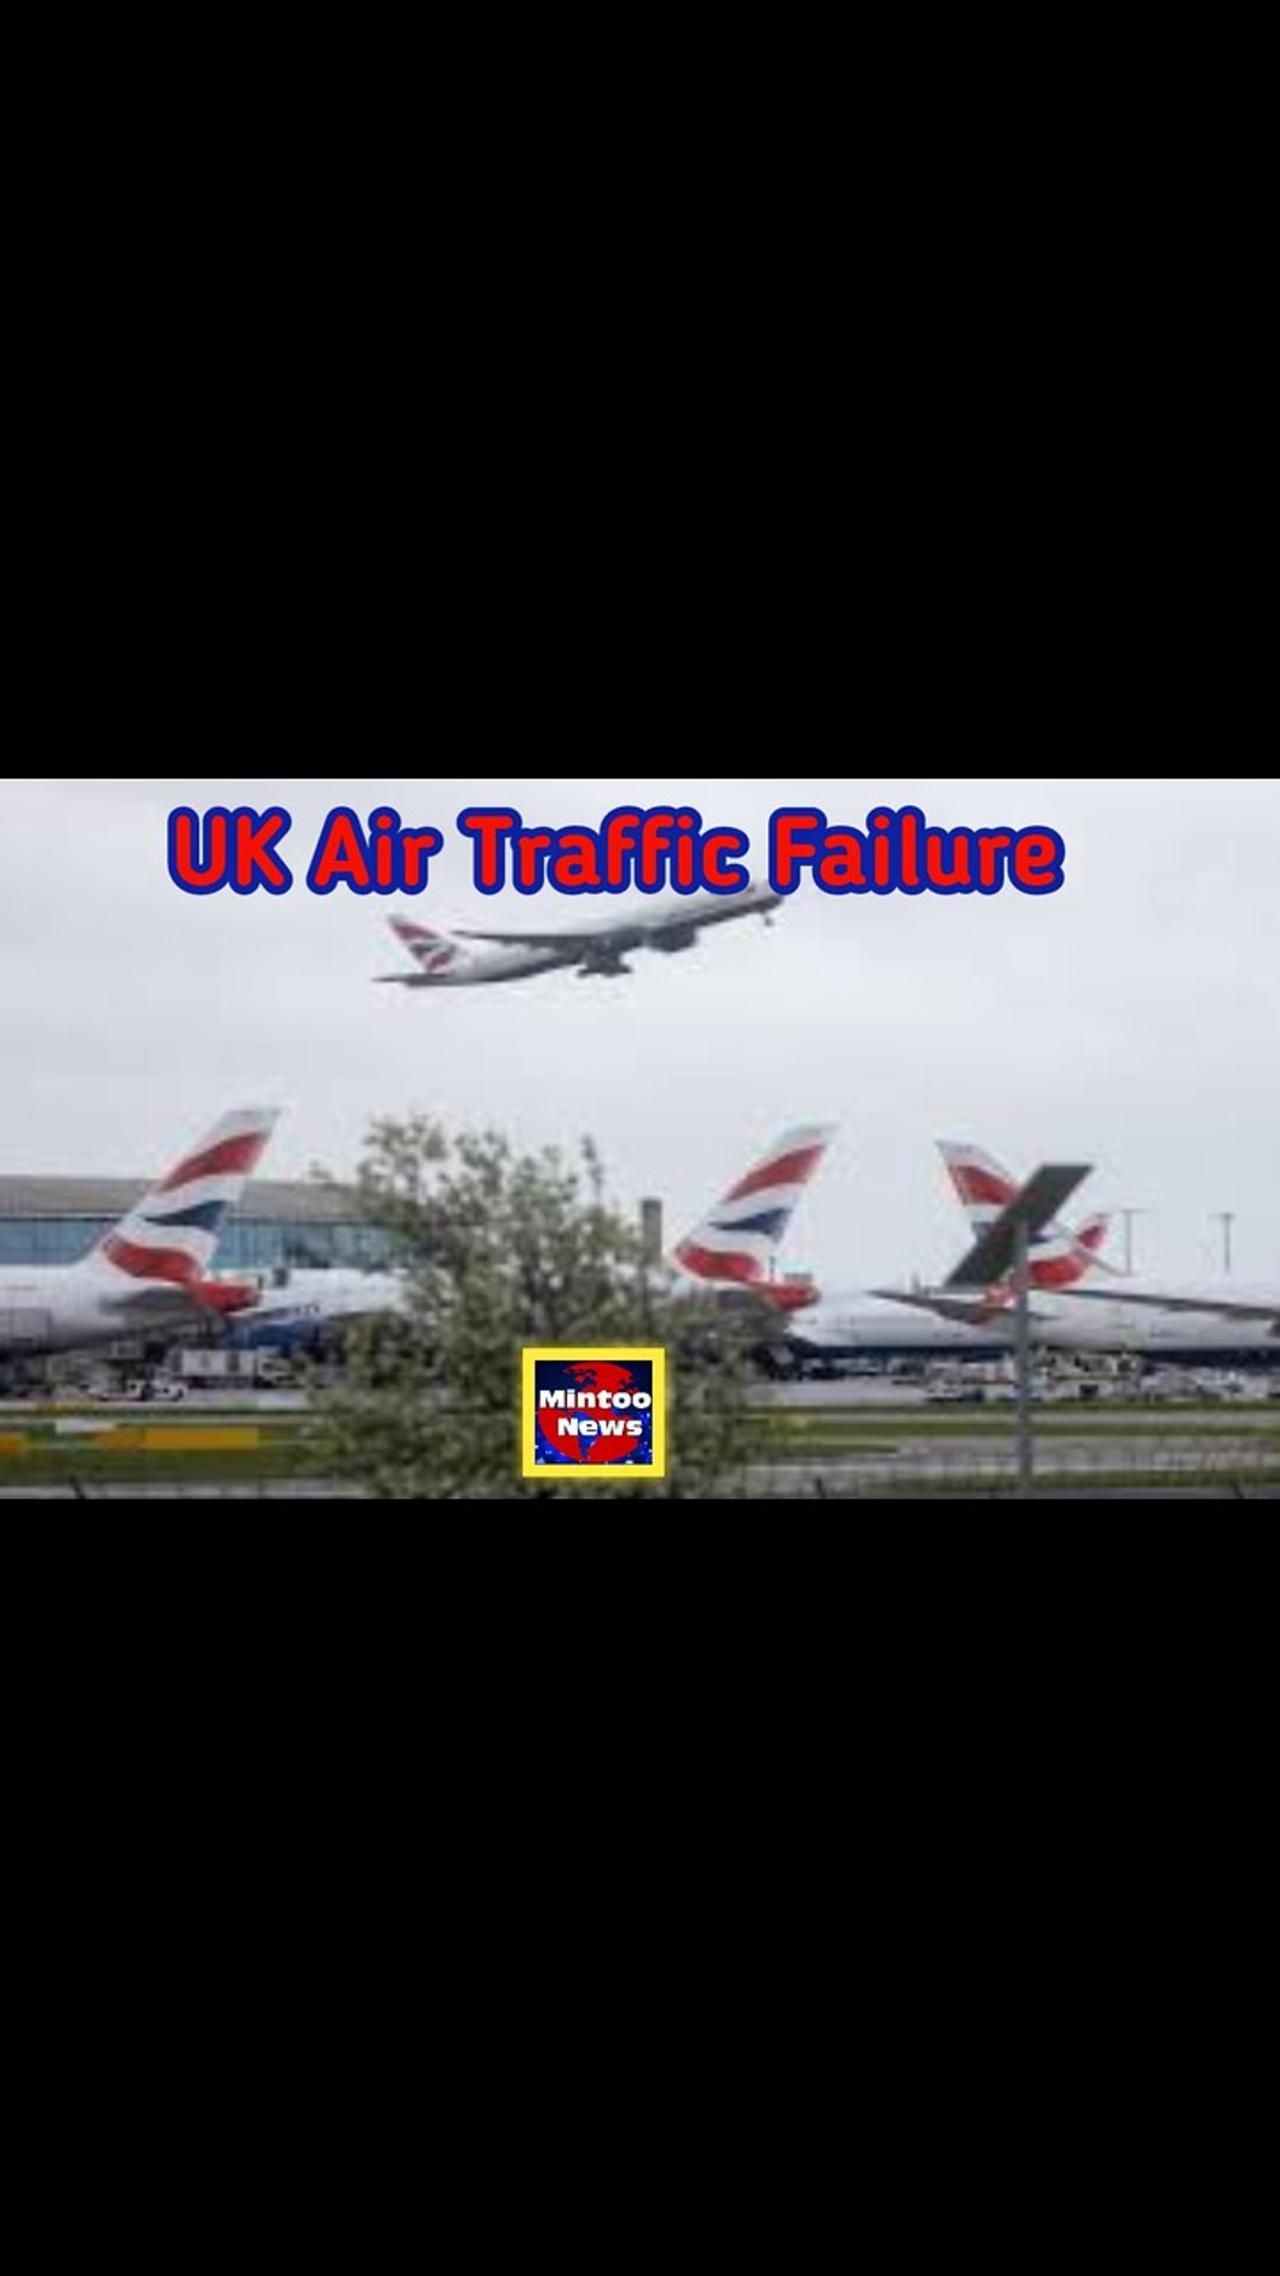 UK air traffic failure: Gatwick planning to operate normal schedule